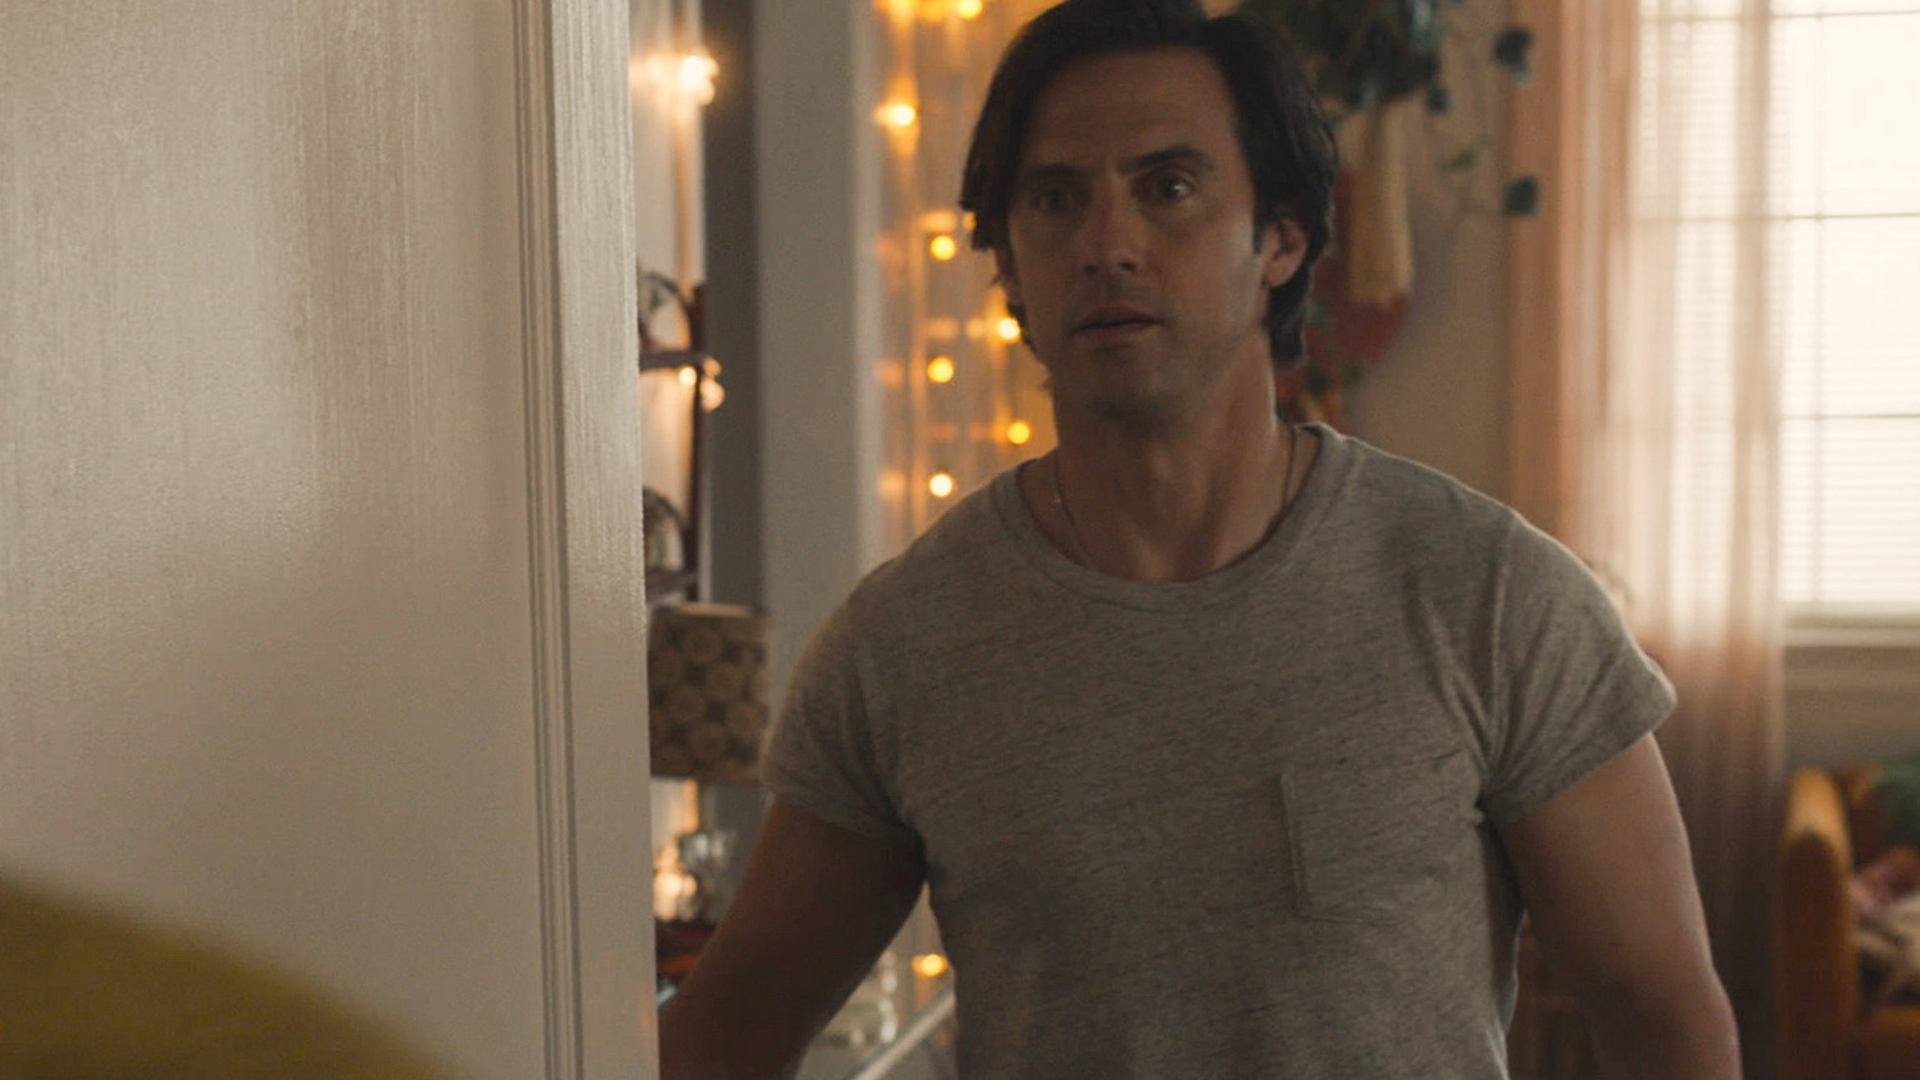 Milo Ventimiglia as Jack Pearson looks at someone with surprise in ‘This Is Us’ Season 5 Episode 12, ‘Both Things Can Be True’